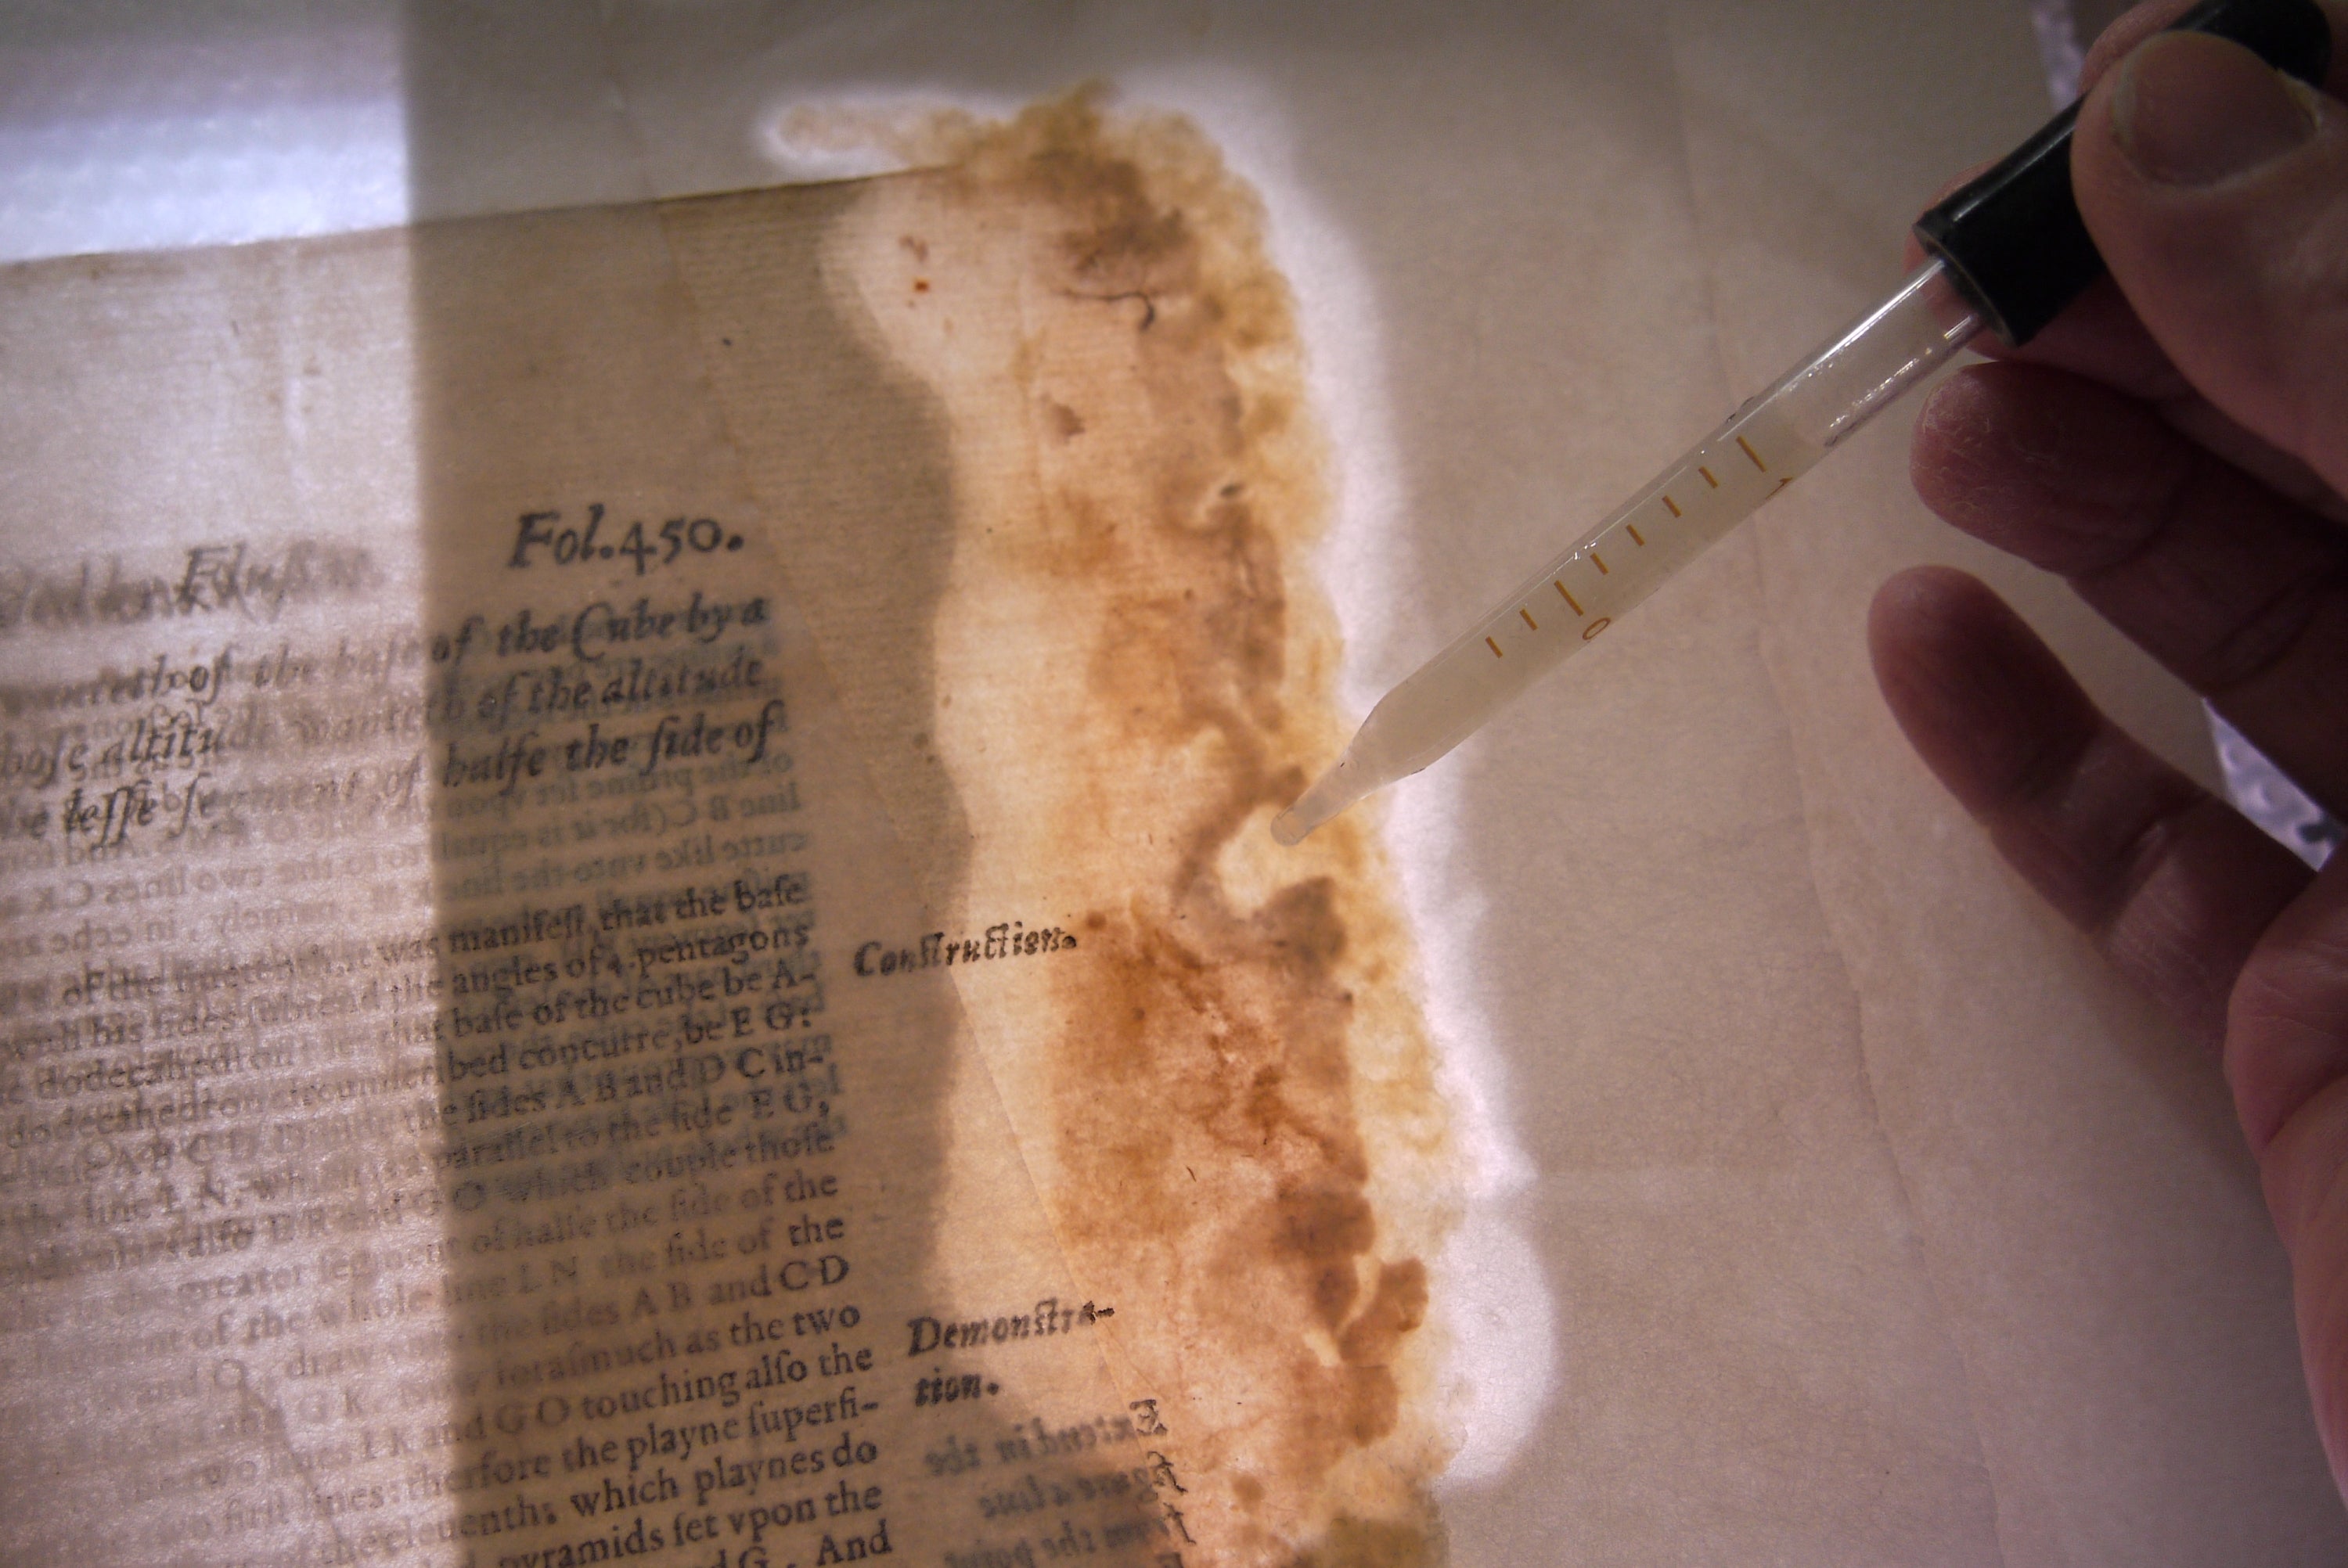 Pulp being applied with an eyedropper